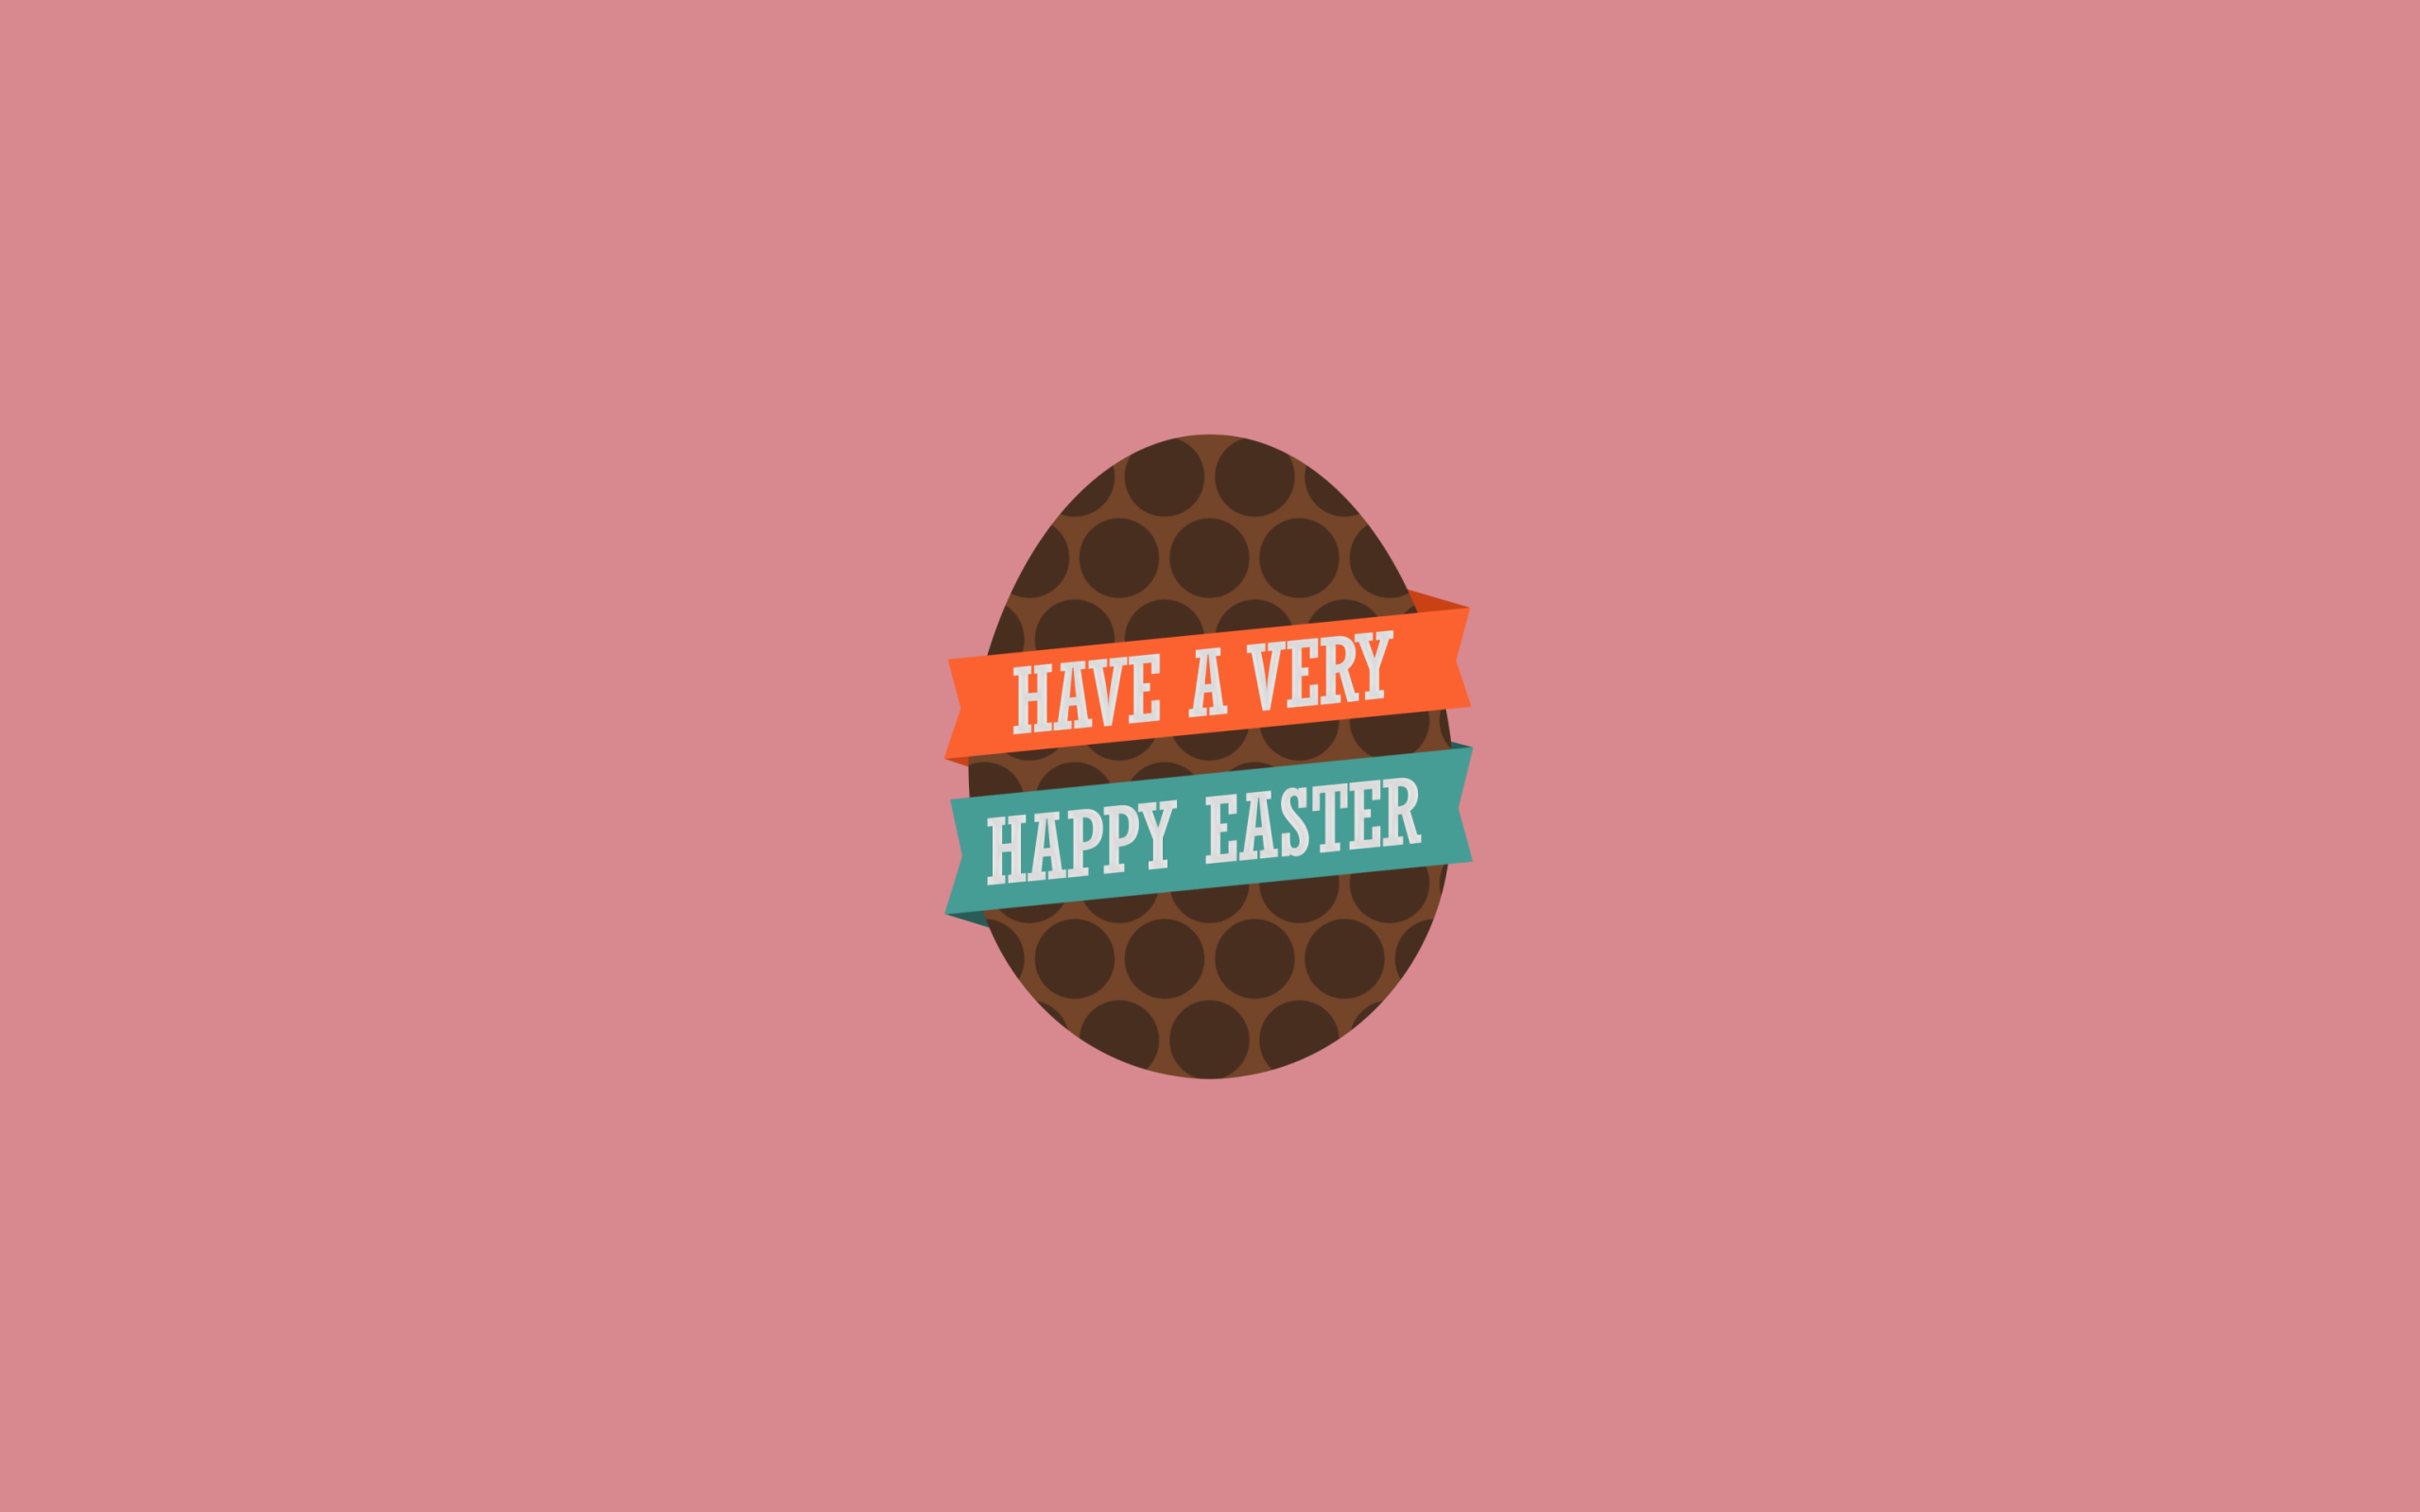 Very Happy Easter Egg wallpaper 2560x1600